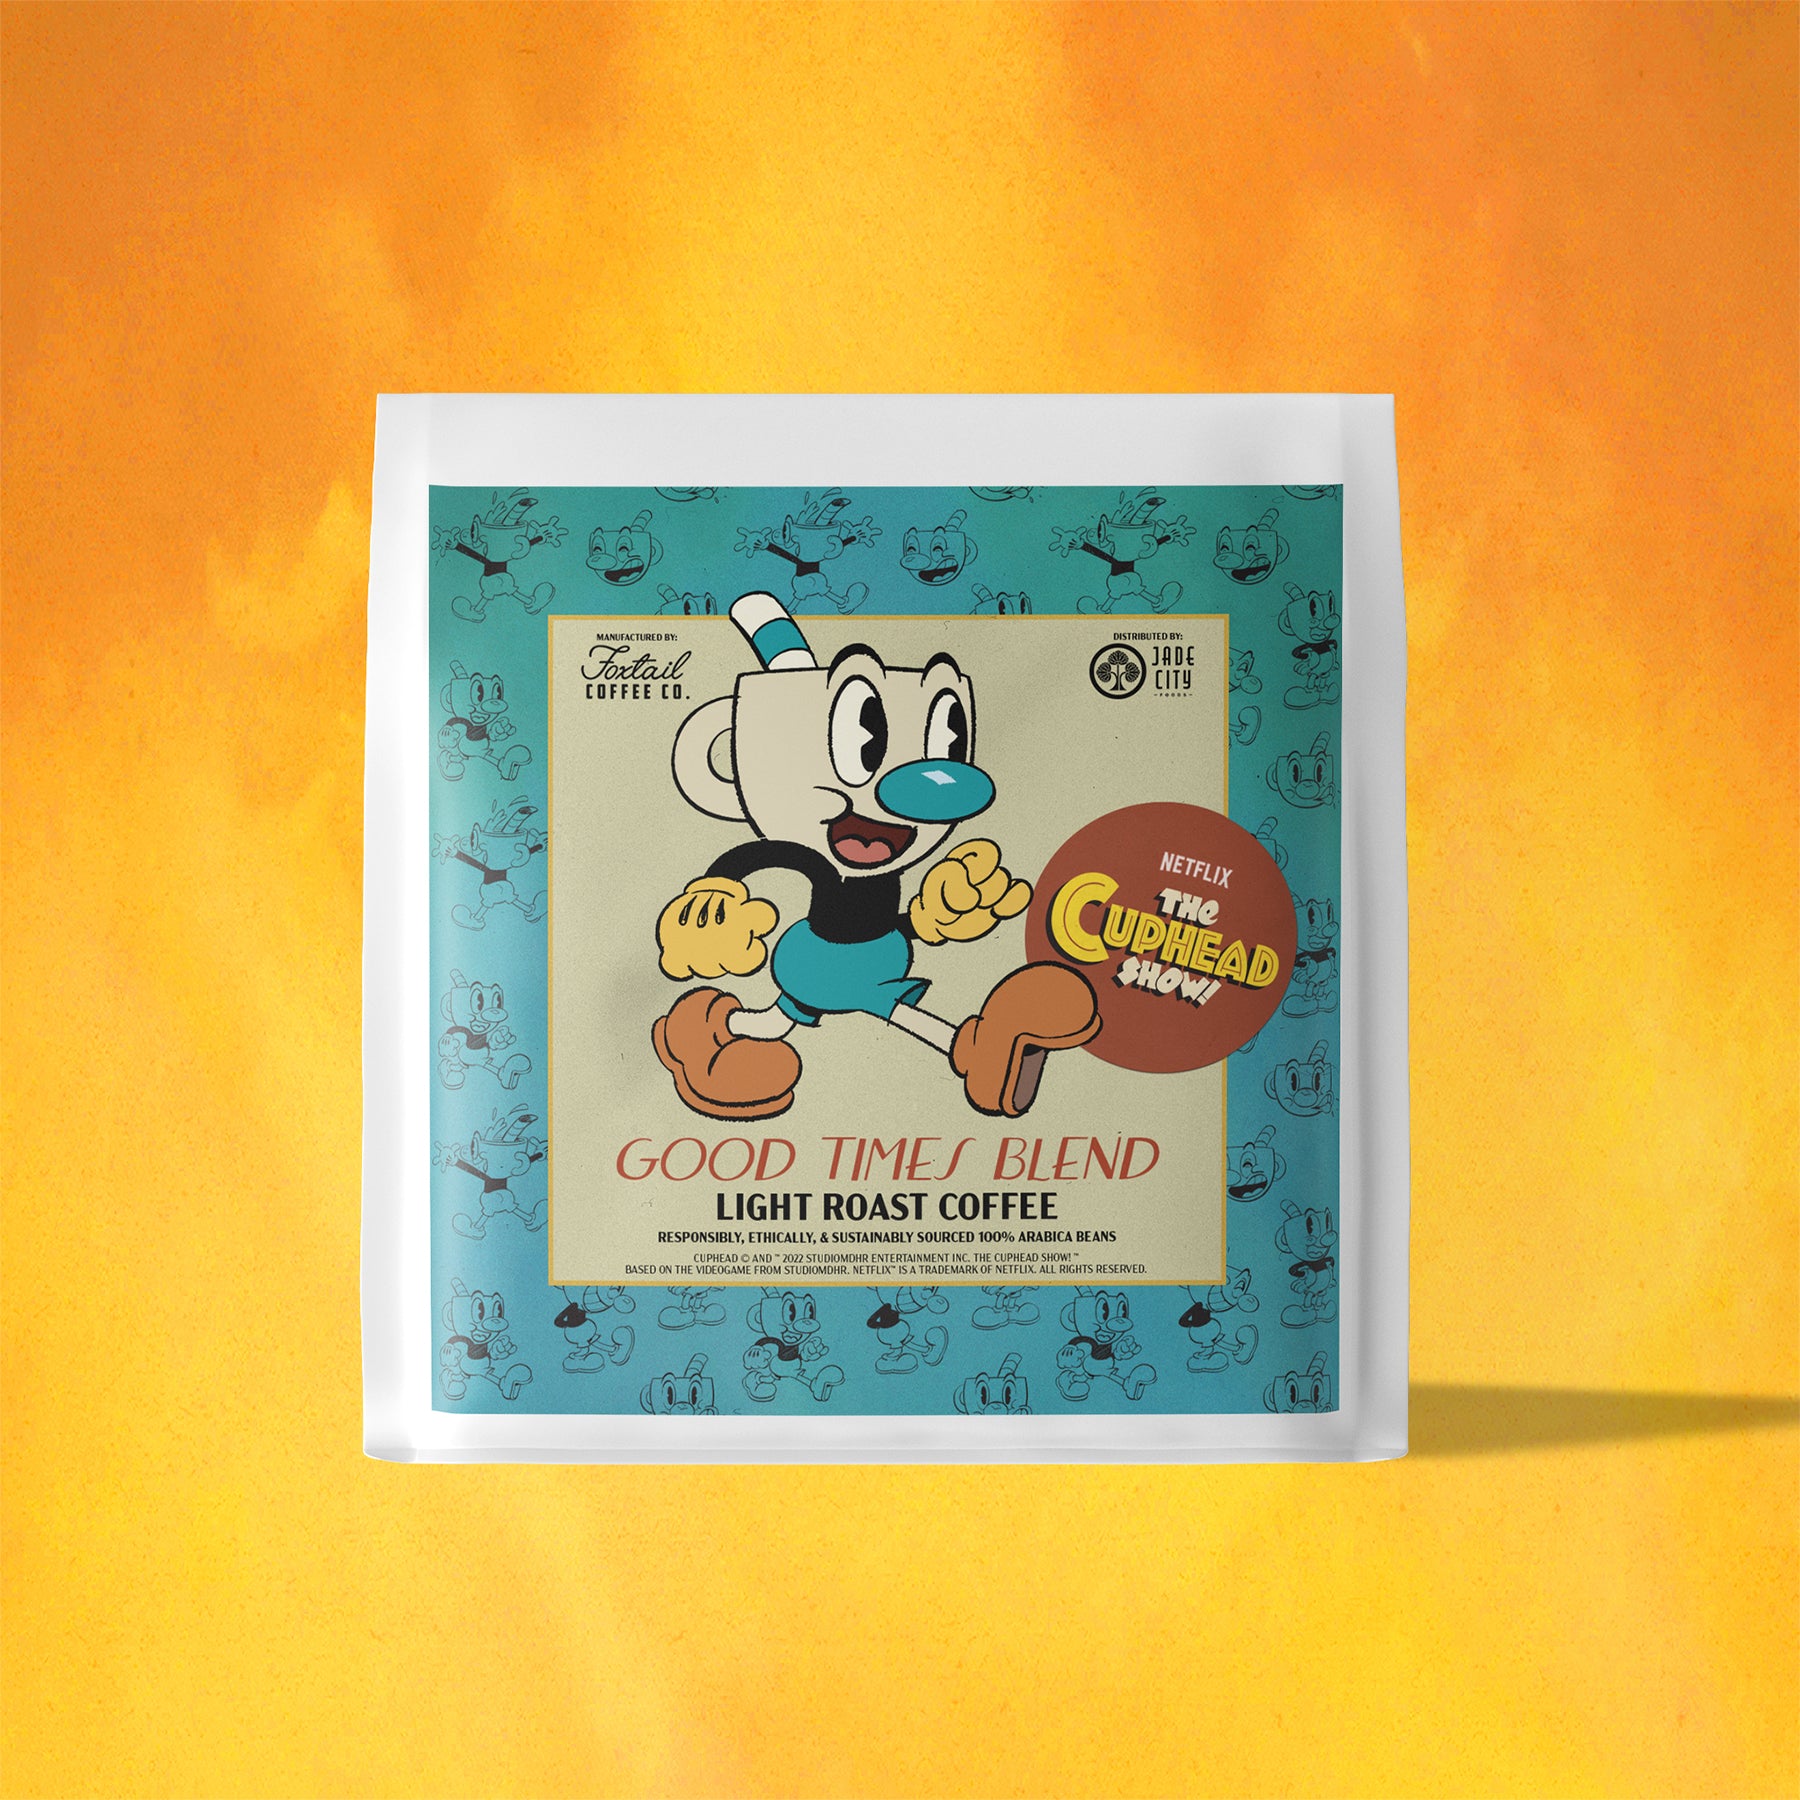 The Cuphead Show BBQ 2-Pack – The Cuphead Show : Officially Licensed Store